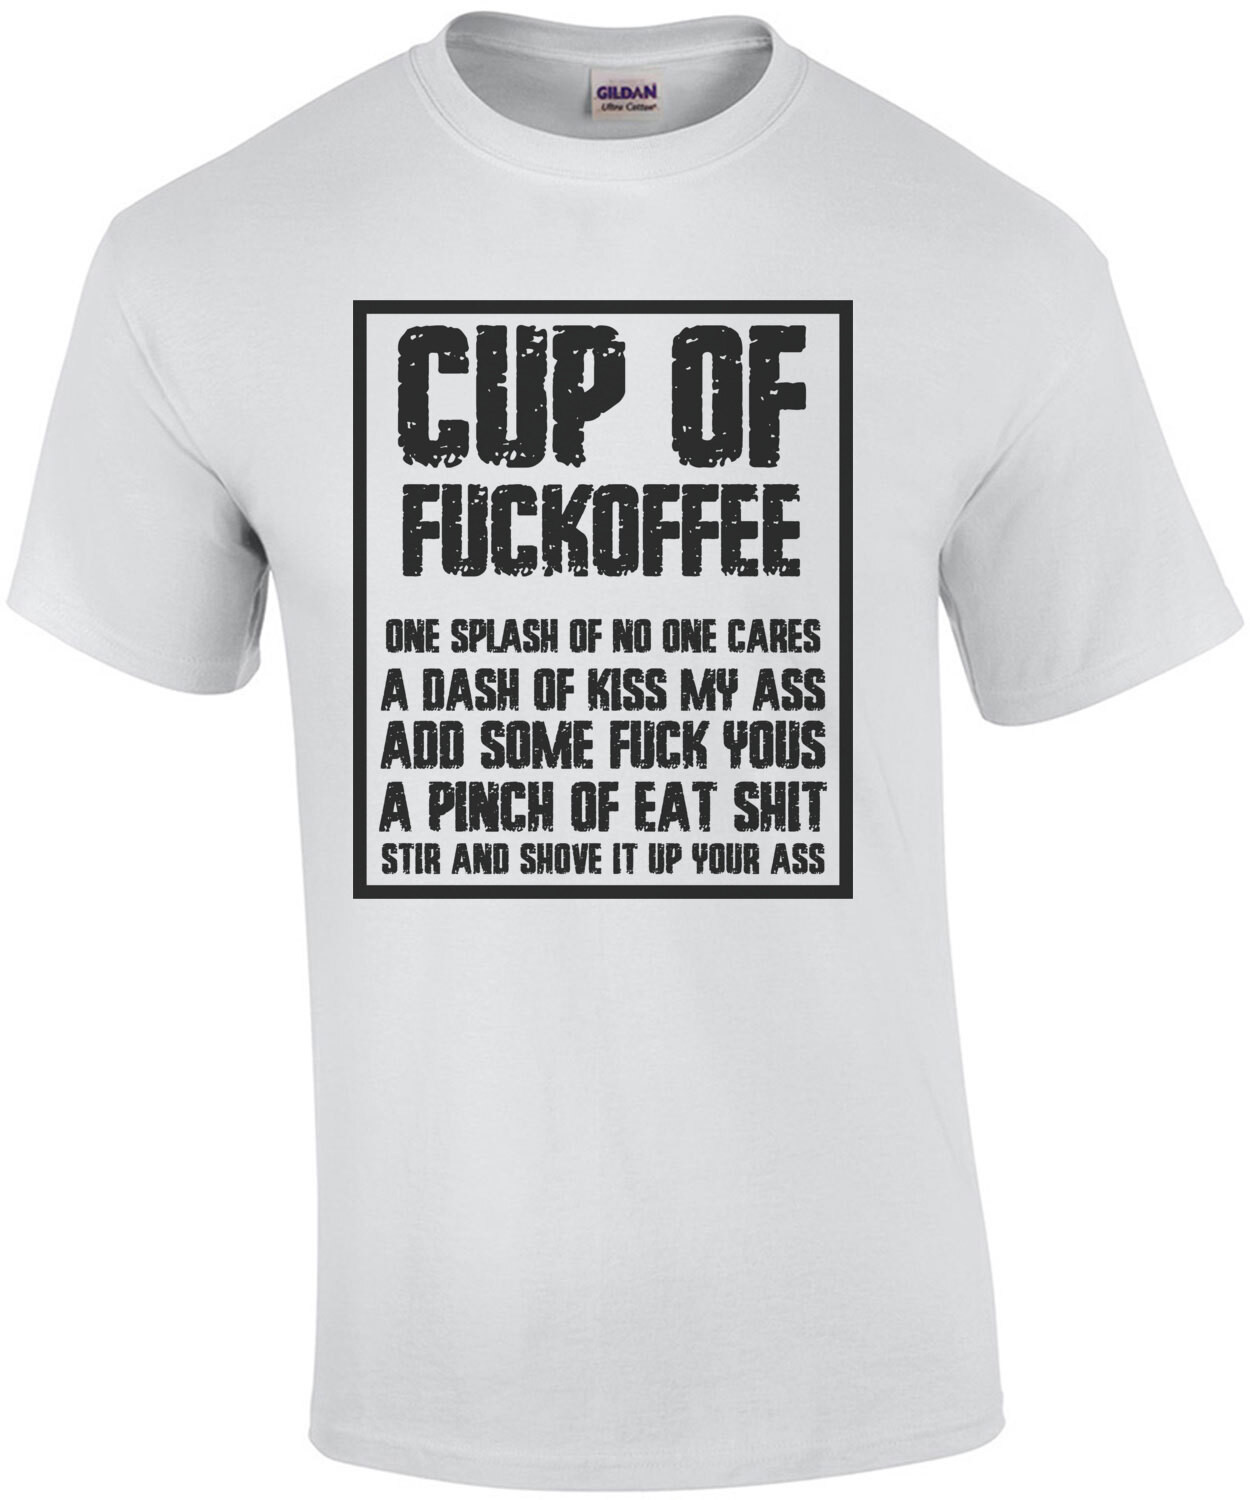 Cup of fuckoffee one splash of no one cares a dash of kiss my ass - funny insult t-shirt